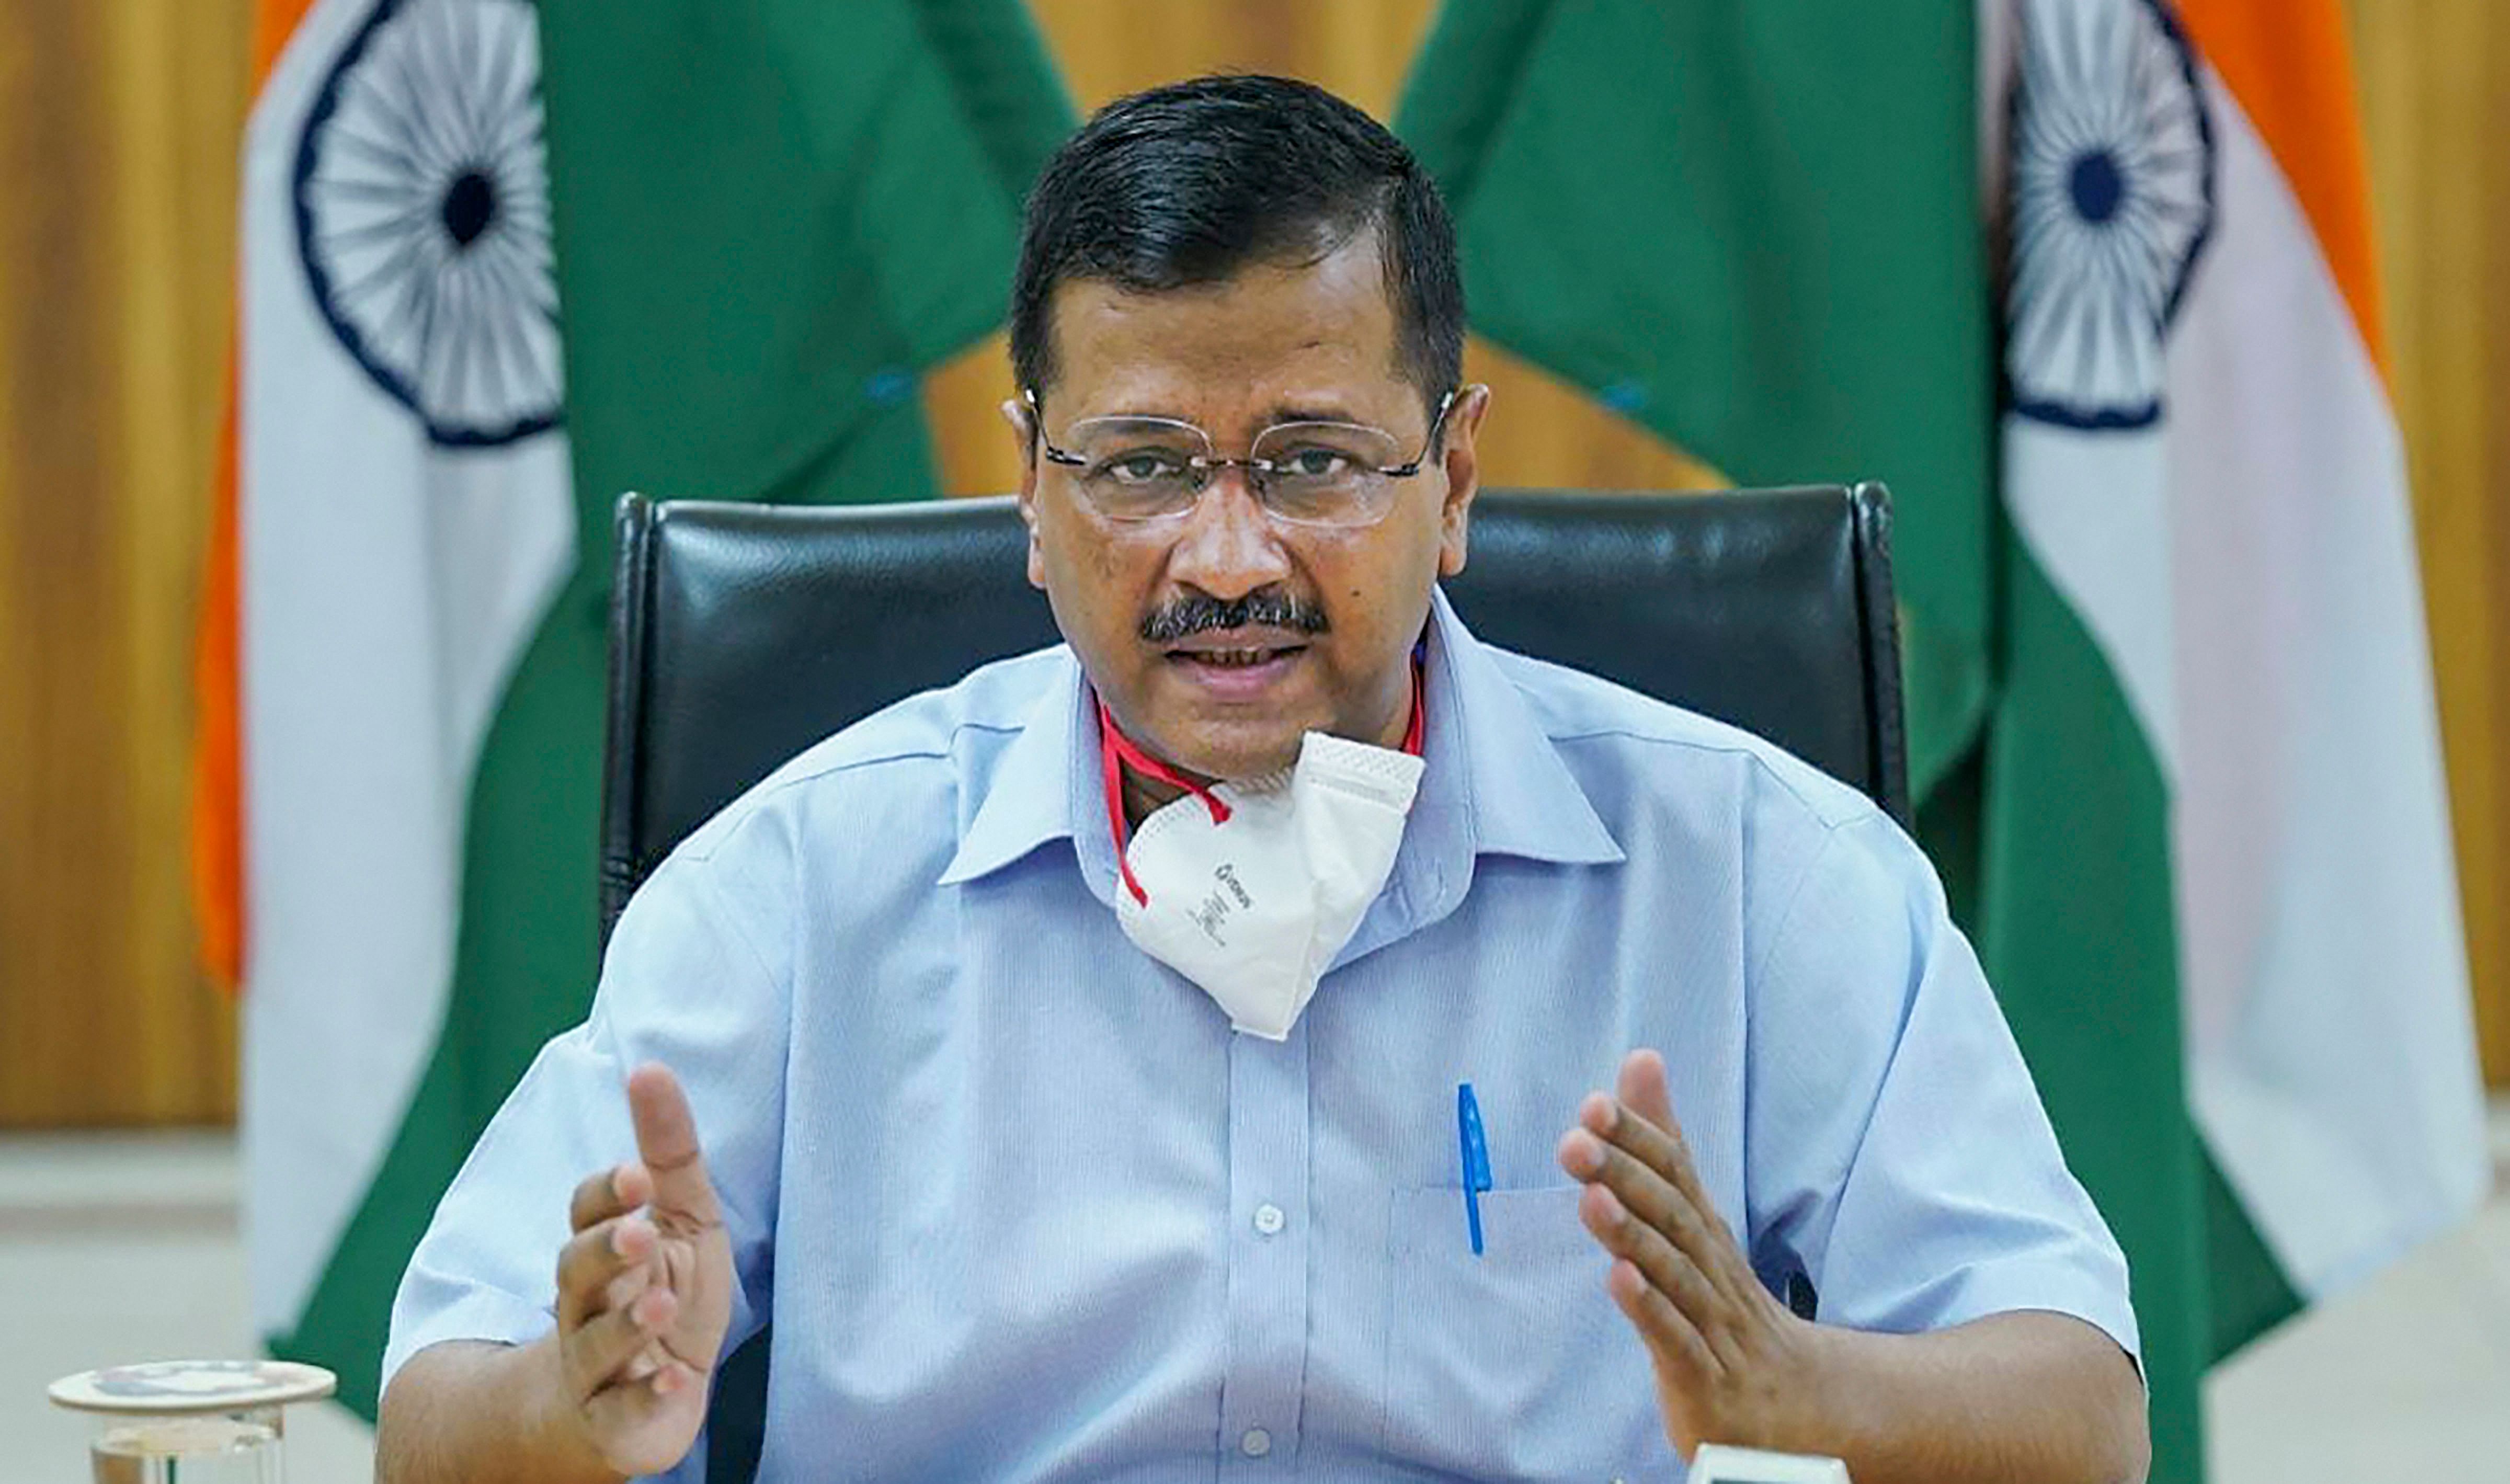 Addressing an online media briefing earlier in the day, Kejriwal said Delhi had reported around 74,000 cases till Thursday. Of them, 45,000 patients have recovered. Credit: PTI Photo